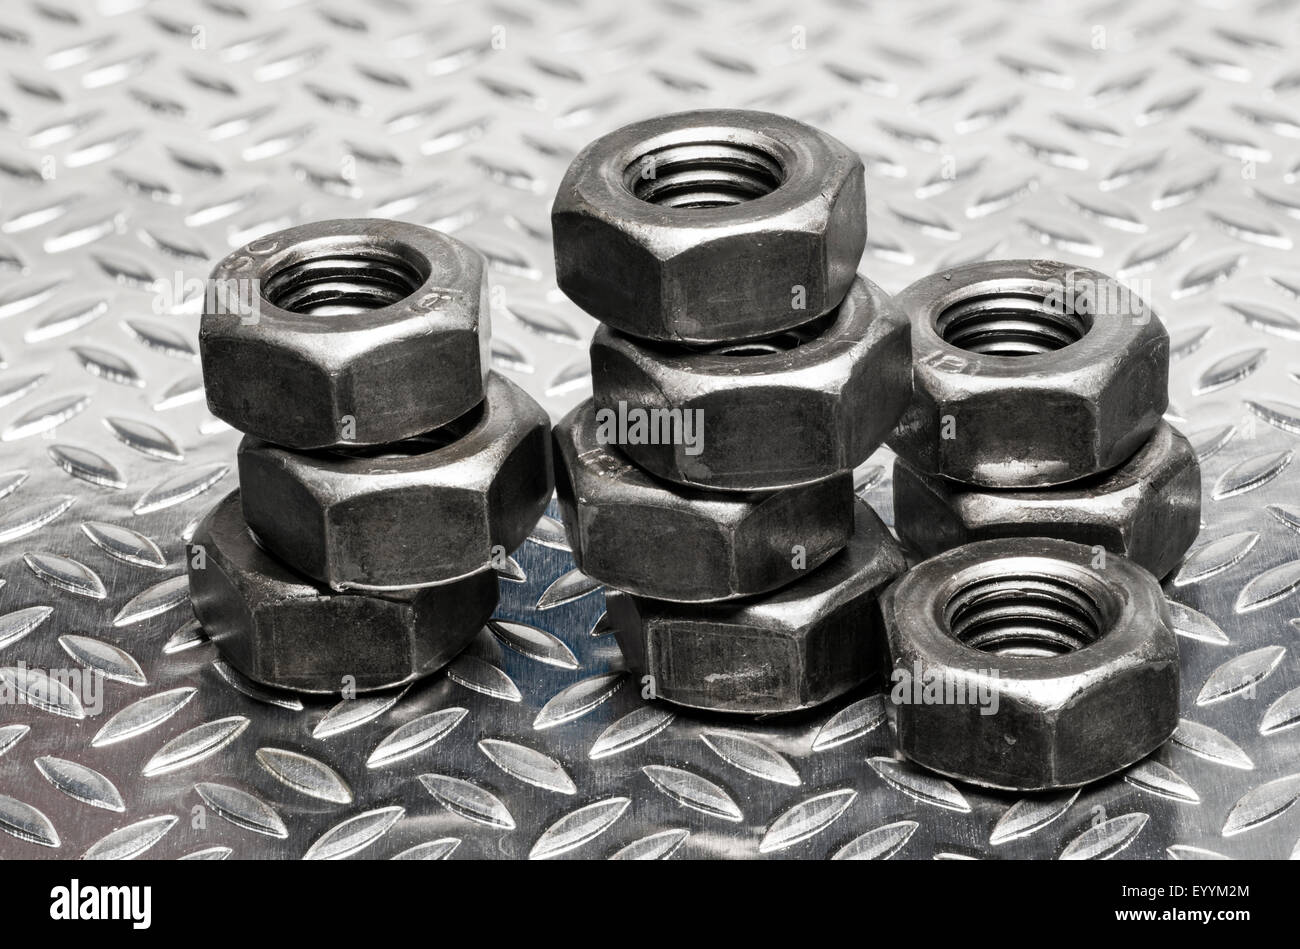 Metric thread Nuts arranged in stacks. Stock Photo